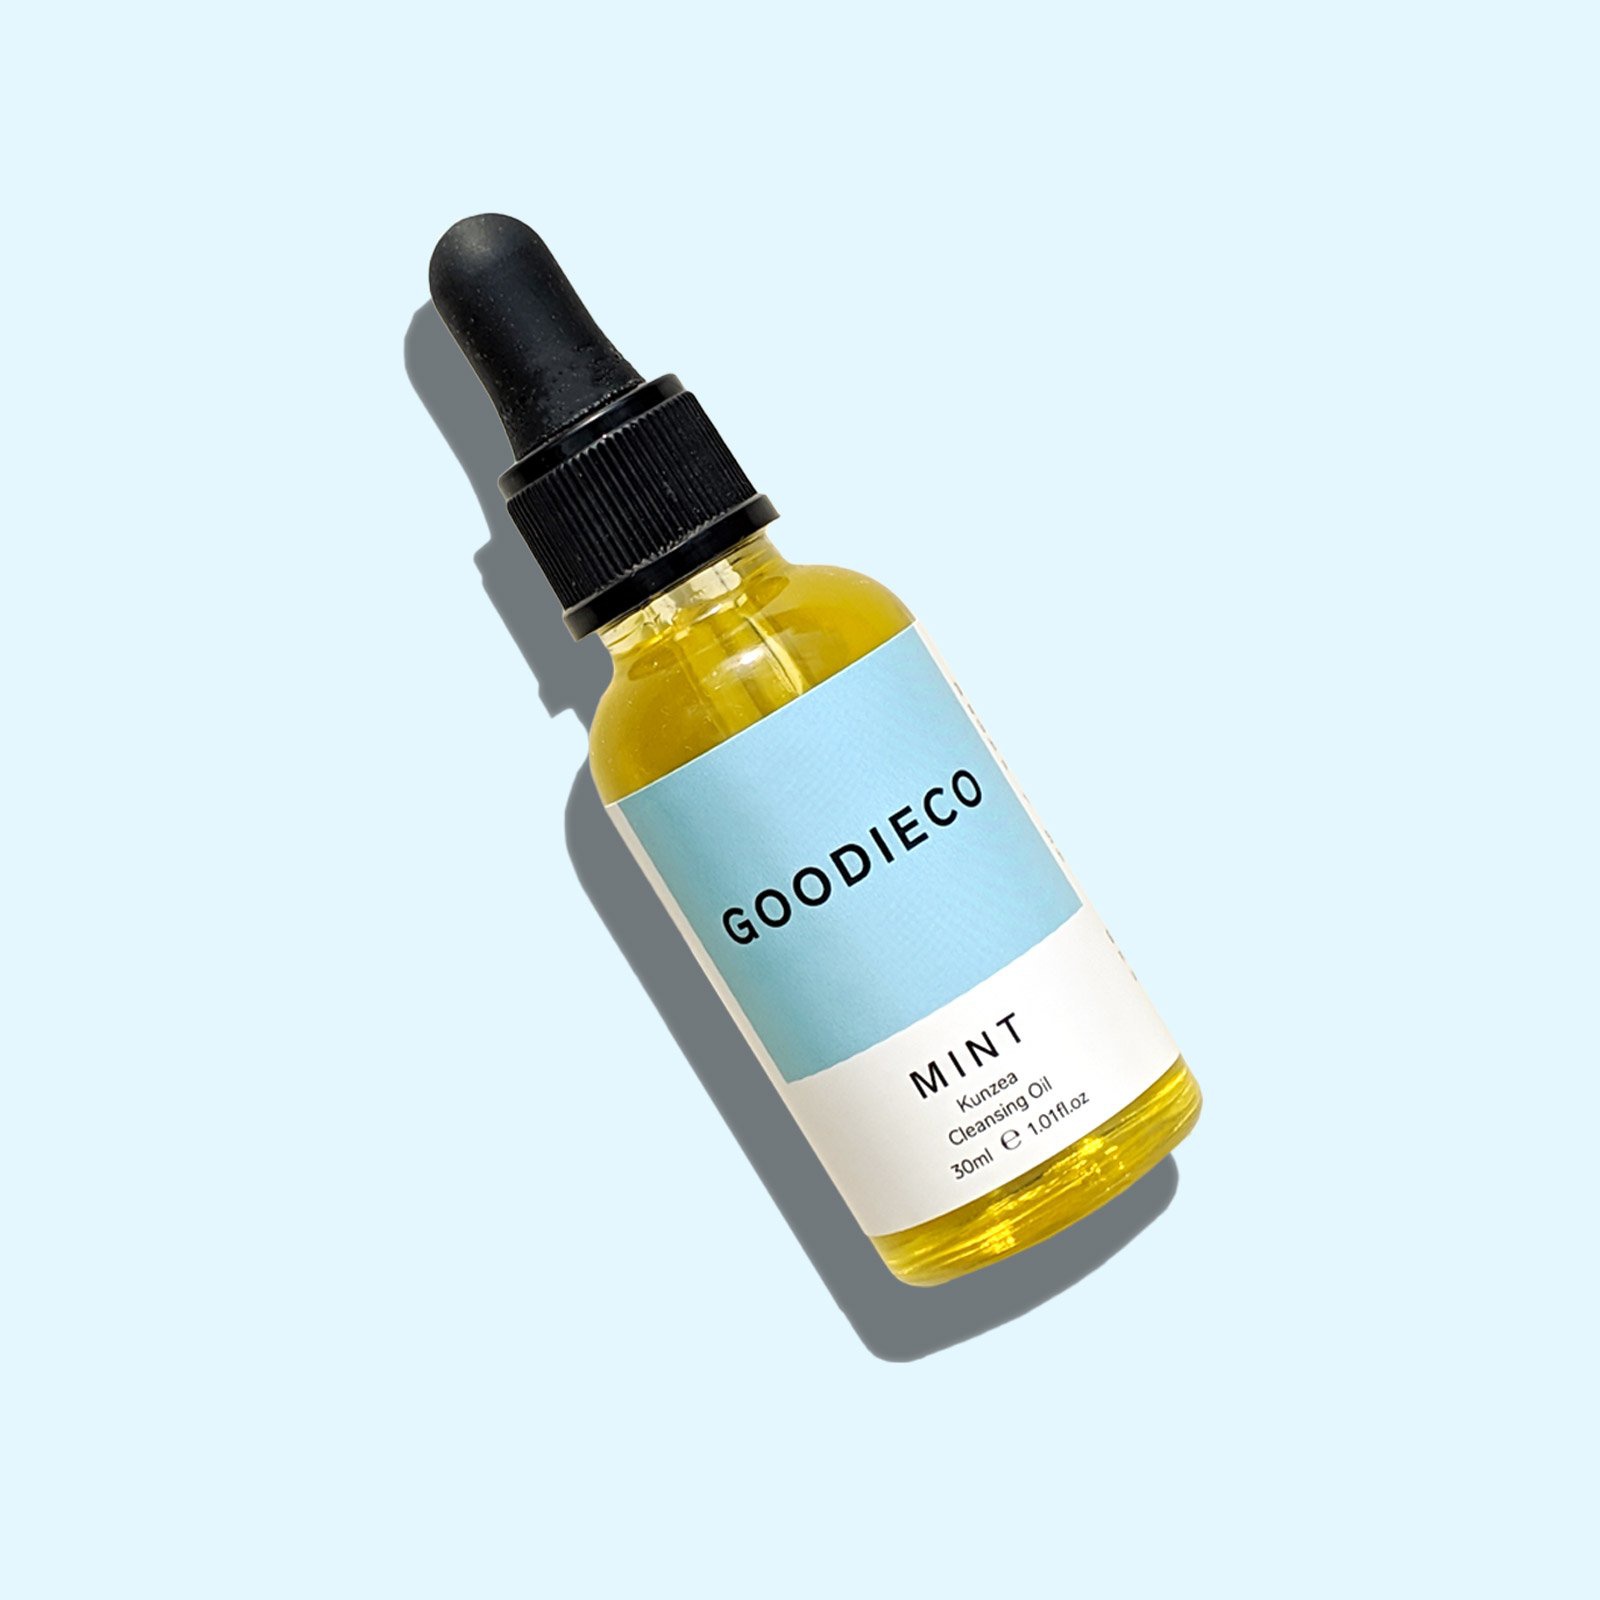 goodieco Mint Cleansing Oil